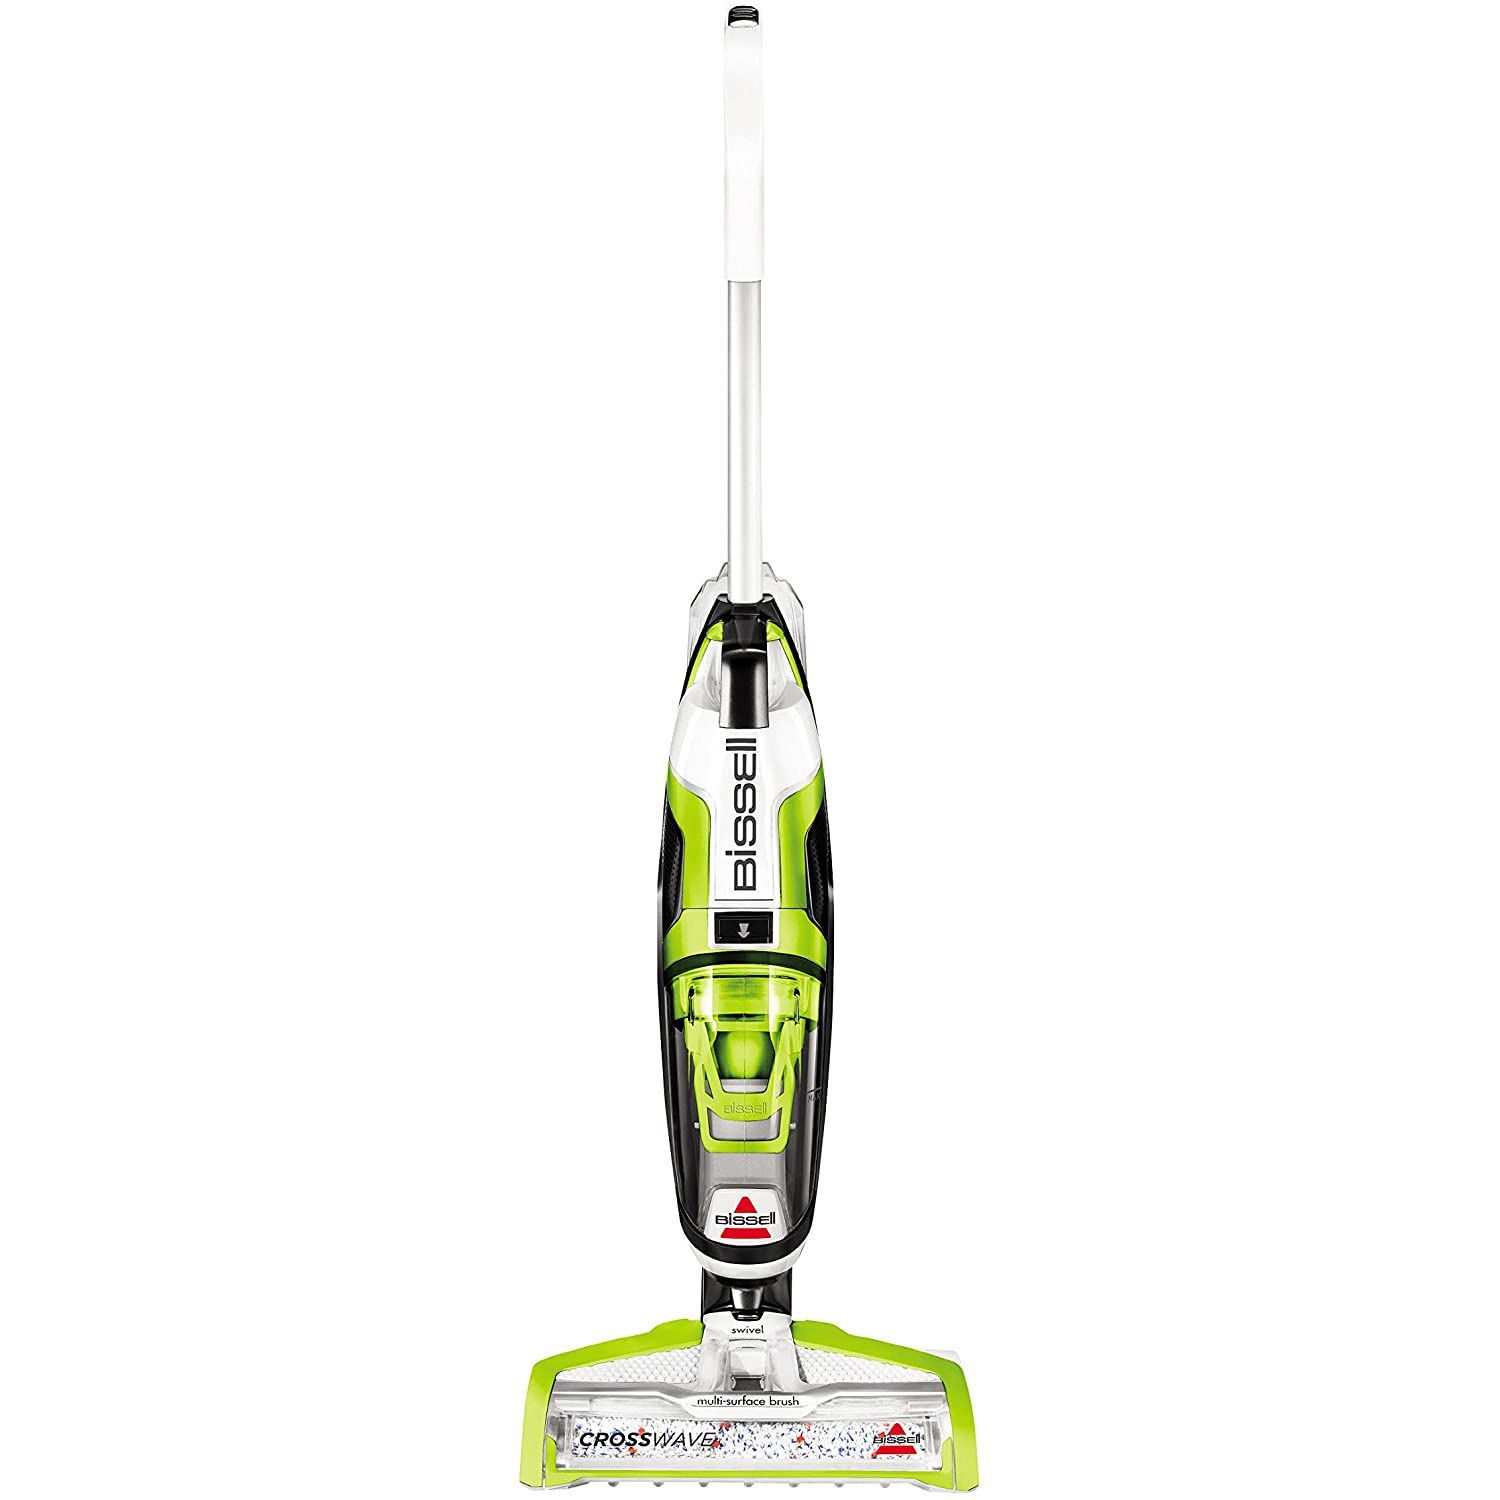 Top Carpet Cleaning Machine Reviews, Best Rug Shampooer